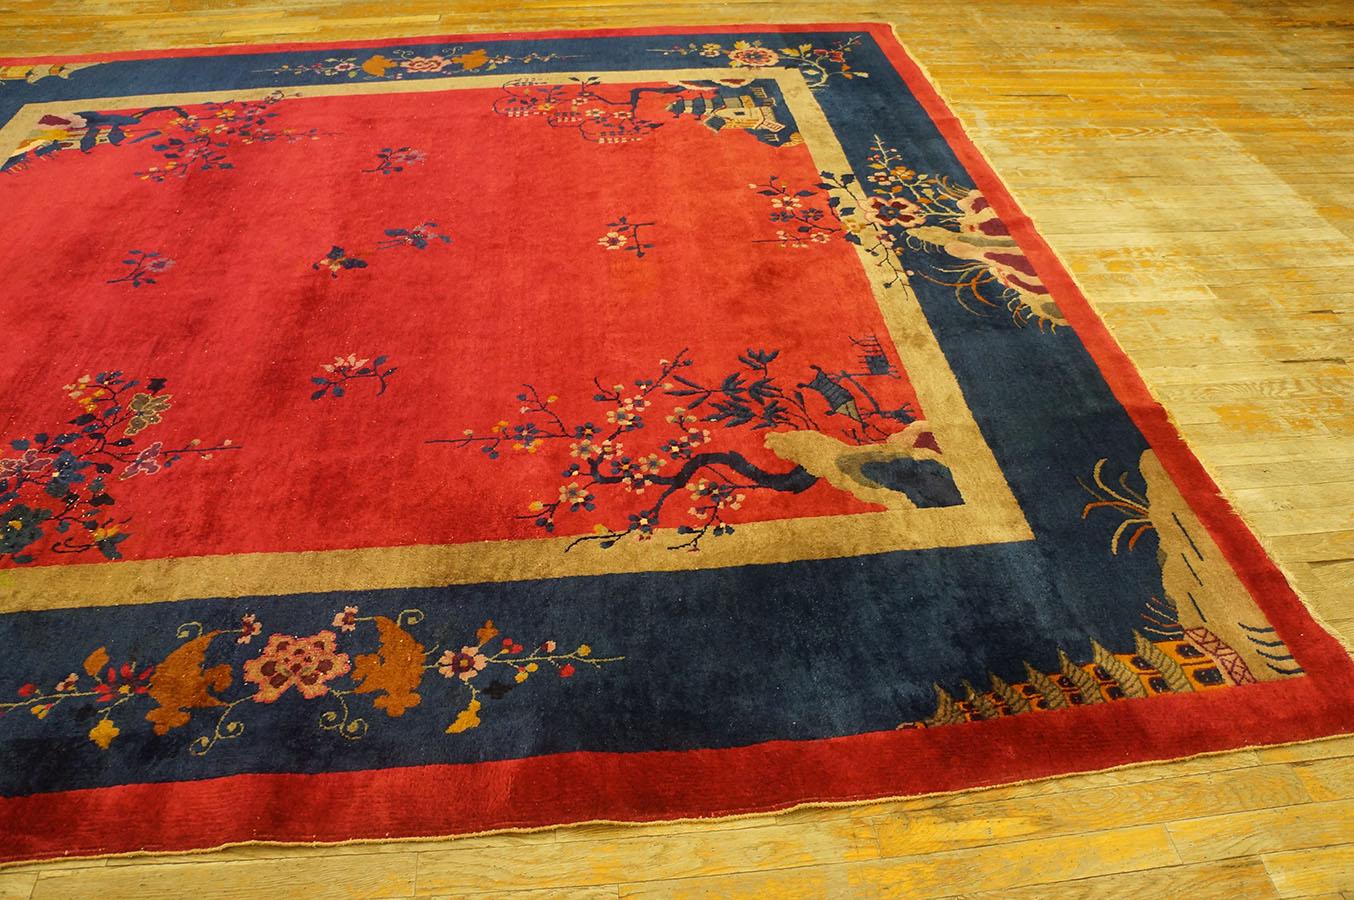 1920s Chinese Art Deco Carpet ( 9' x 9' 9'' - 275 x 297 cm ) In Good Condition For Sale In New York, NY